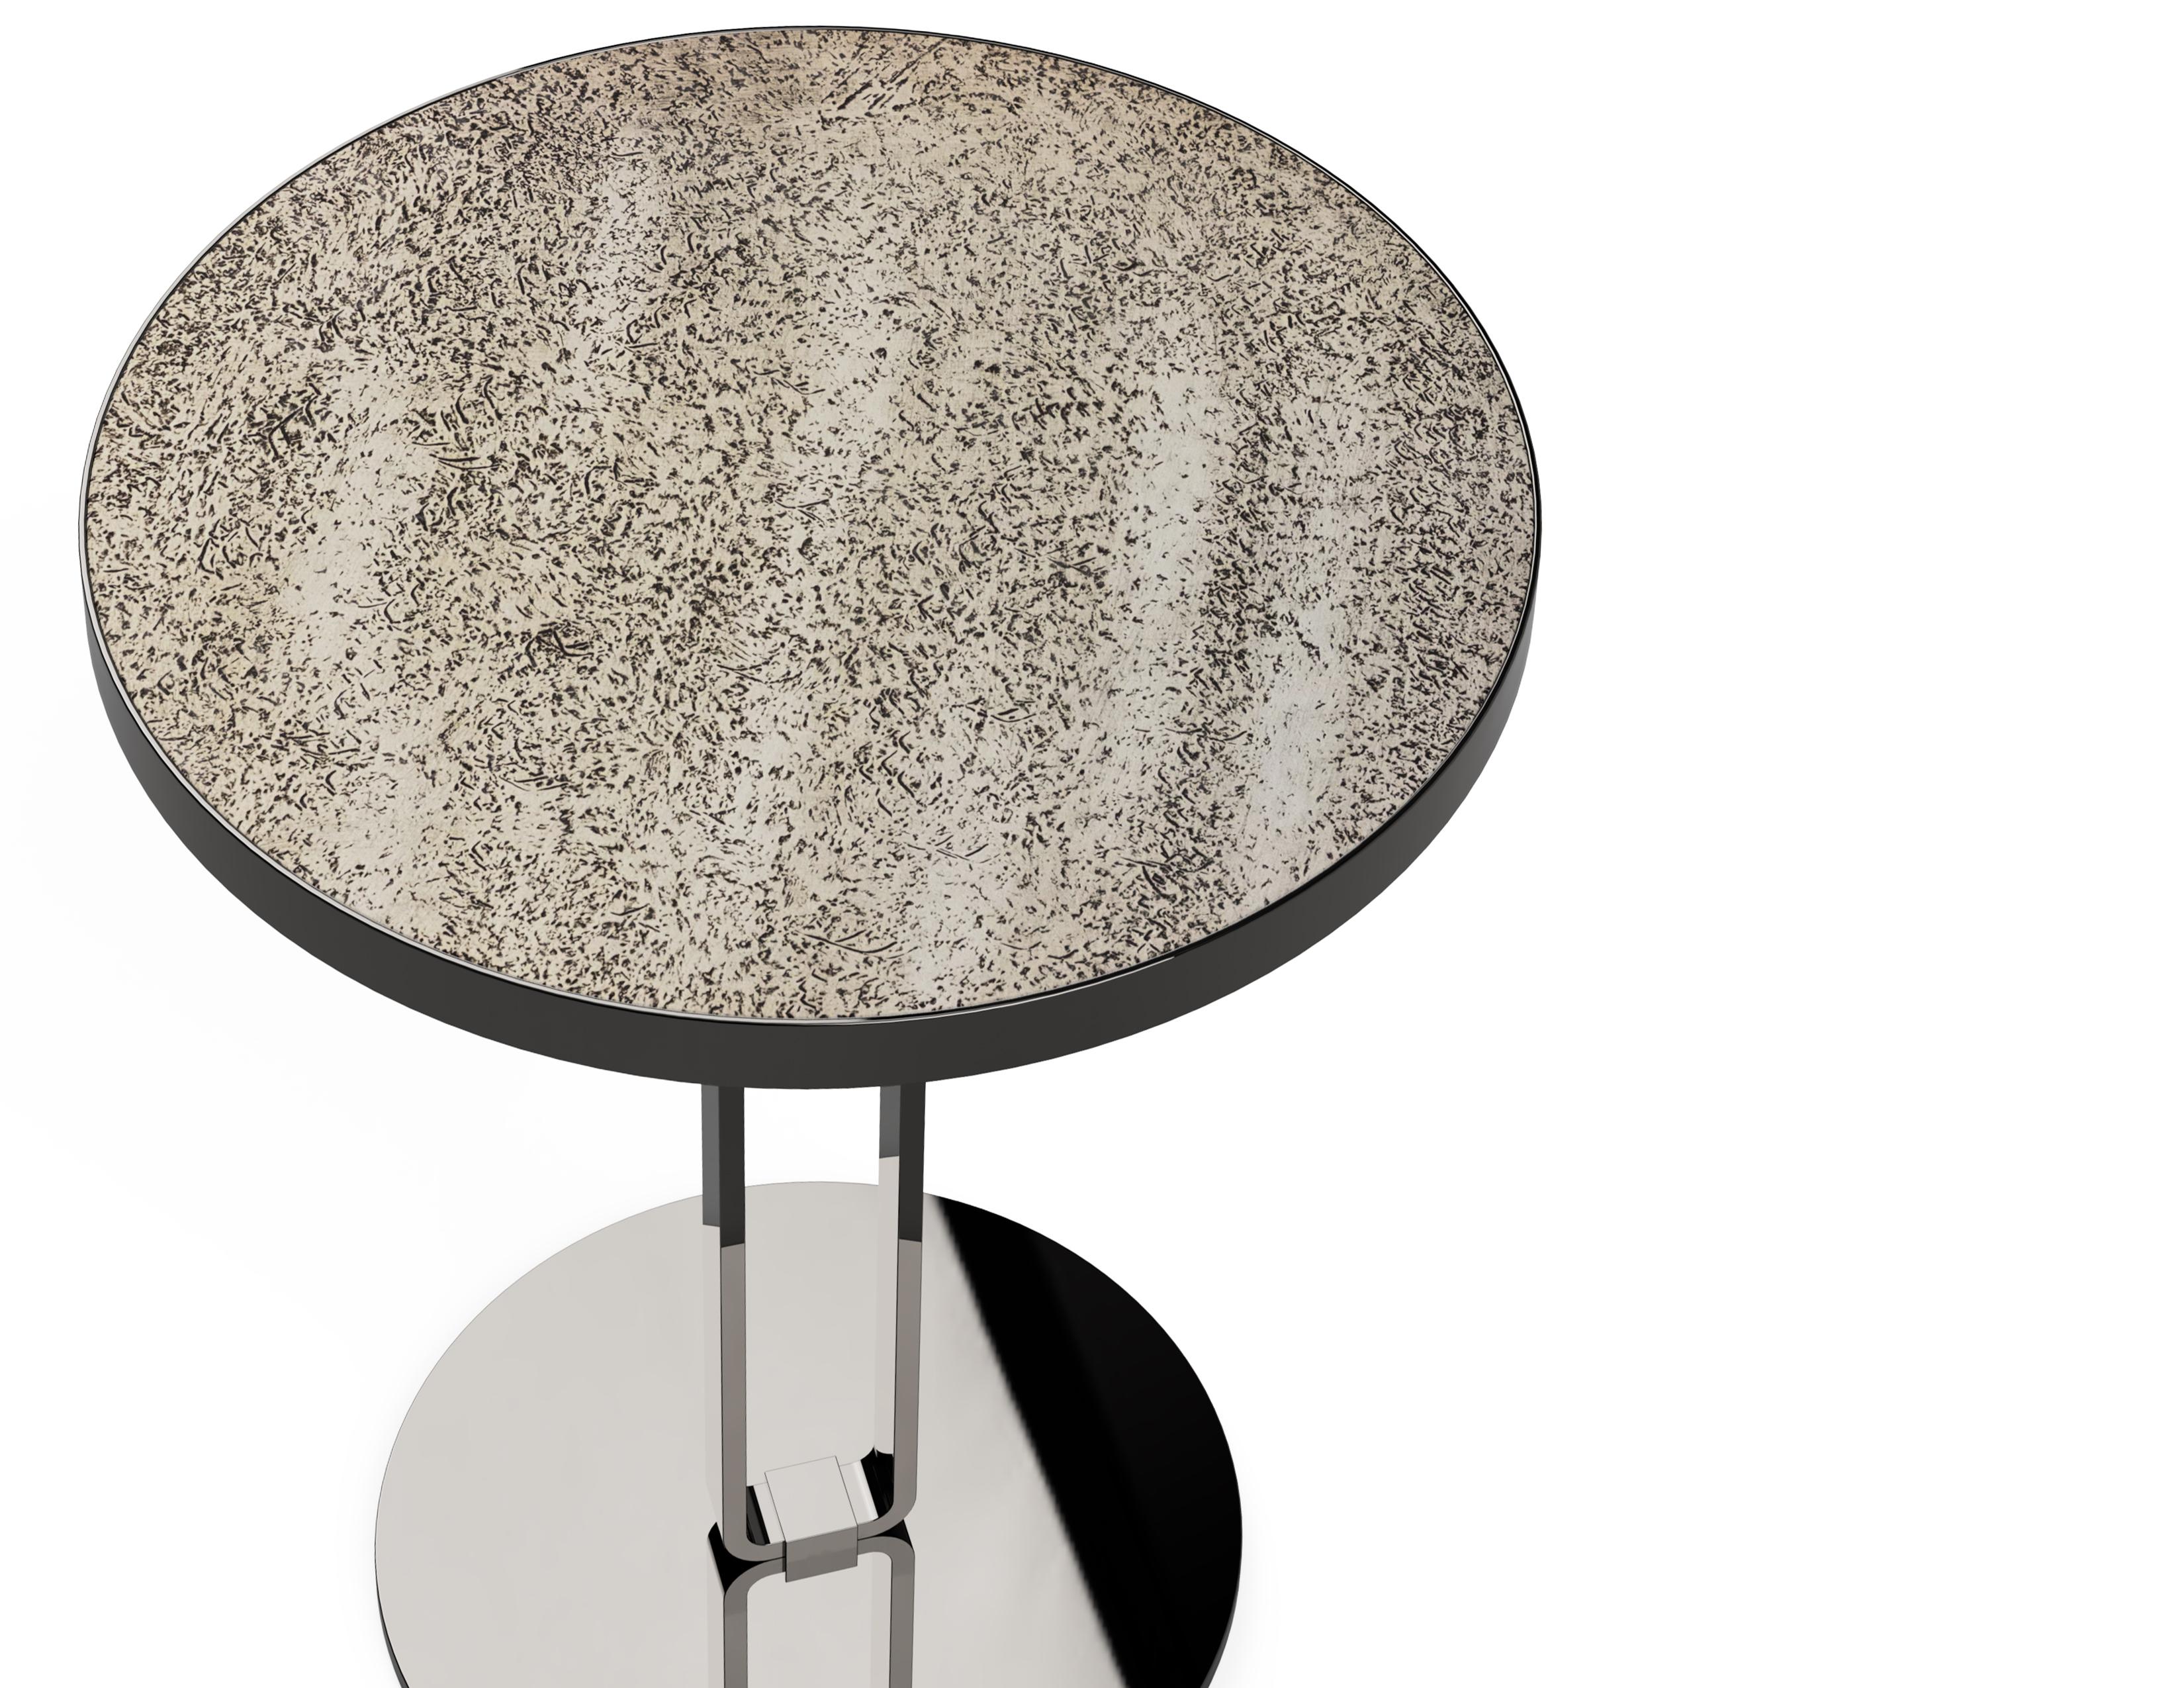 European Side Table, Lacquered Wood in Textured Finish Top, Titanium Plated Metal Base For Sale